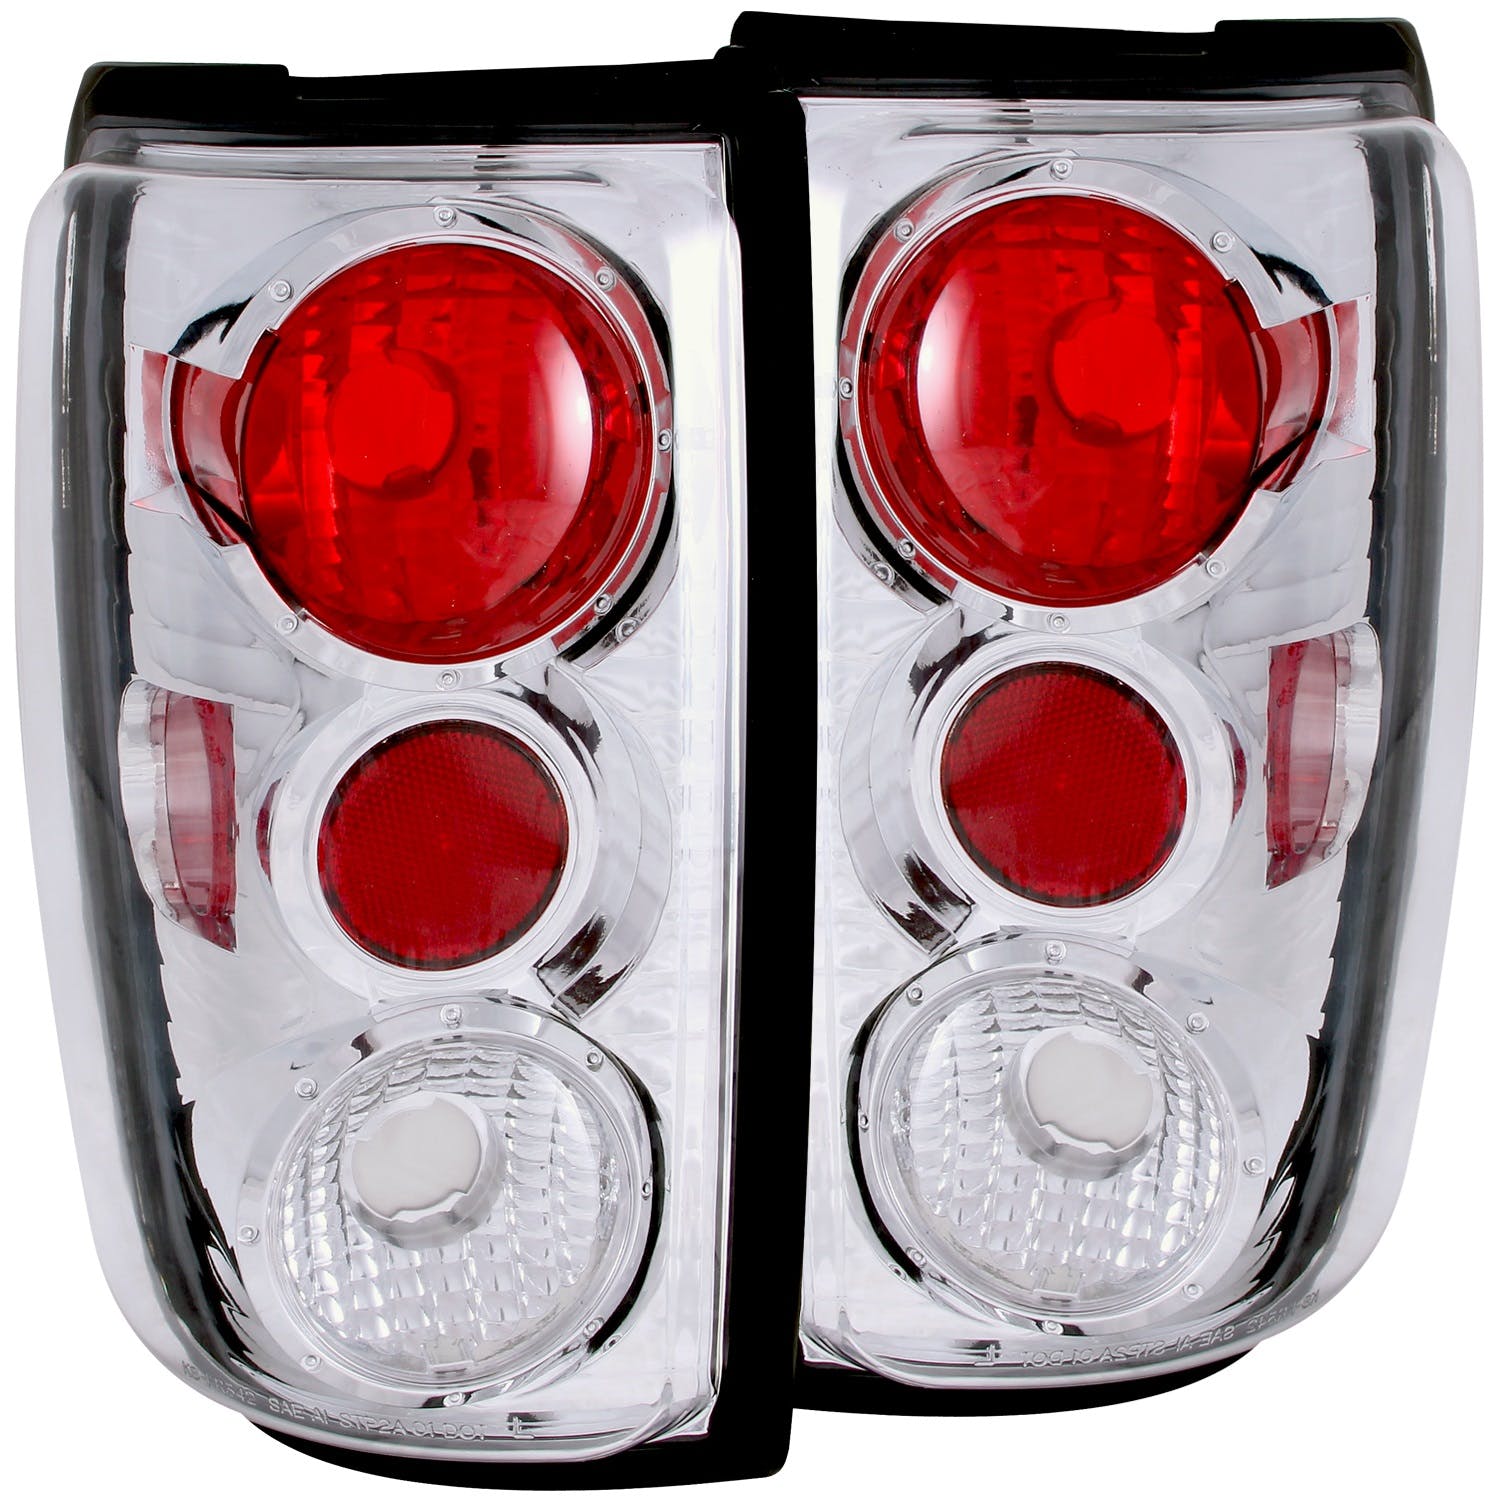 AnzoUSA 211055 Taillights Chrome